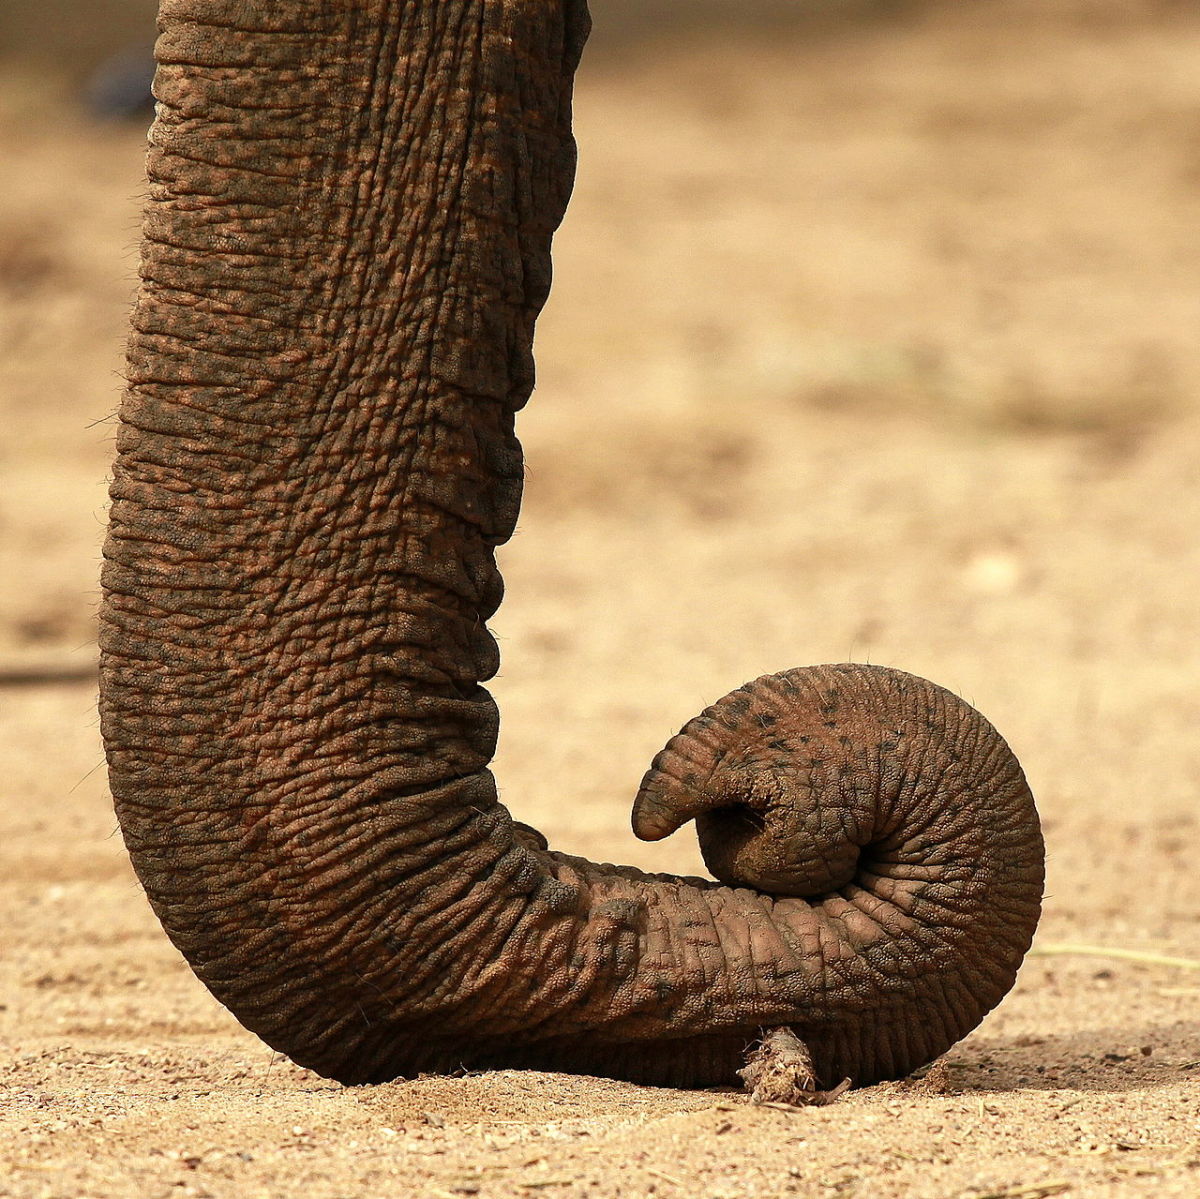   The trunk of an Elephant